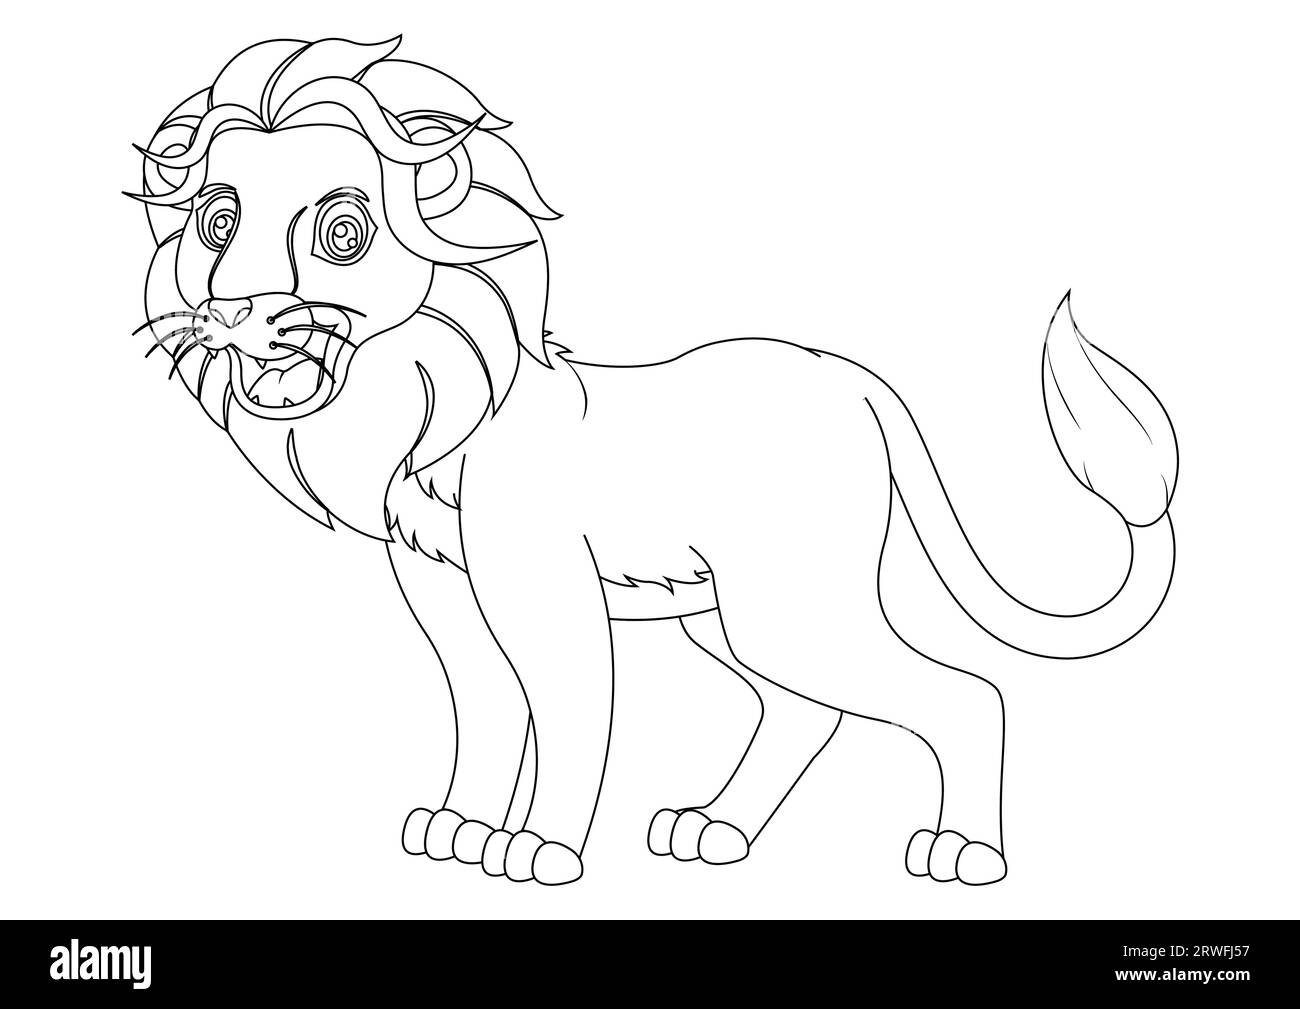 Black and white lion cartoon character vector illustration. Coloring page of cartoon lion Stock Vector